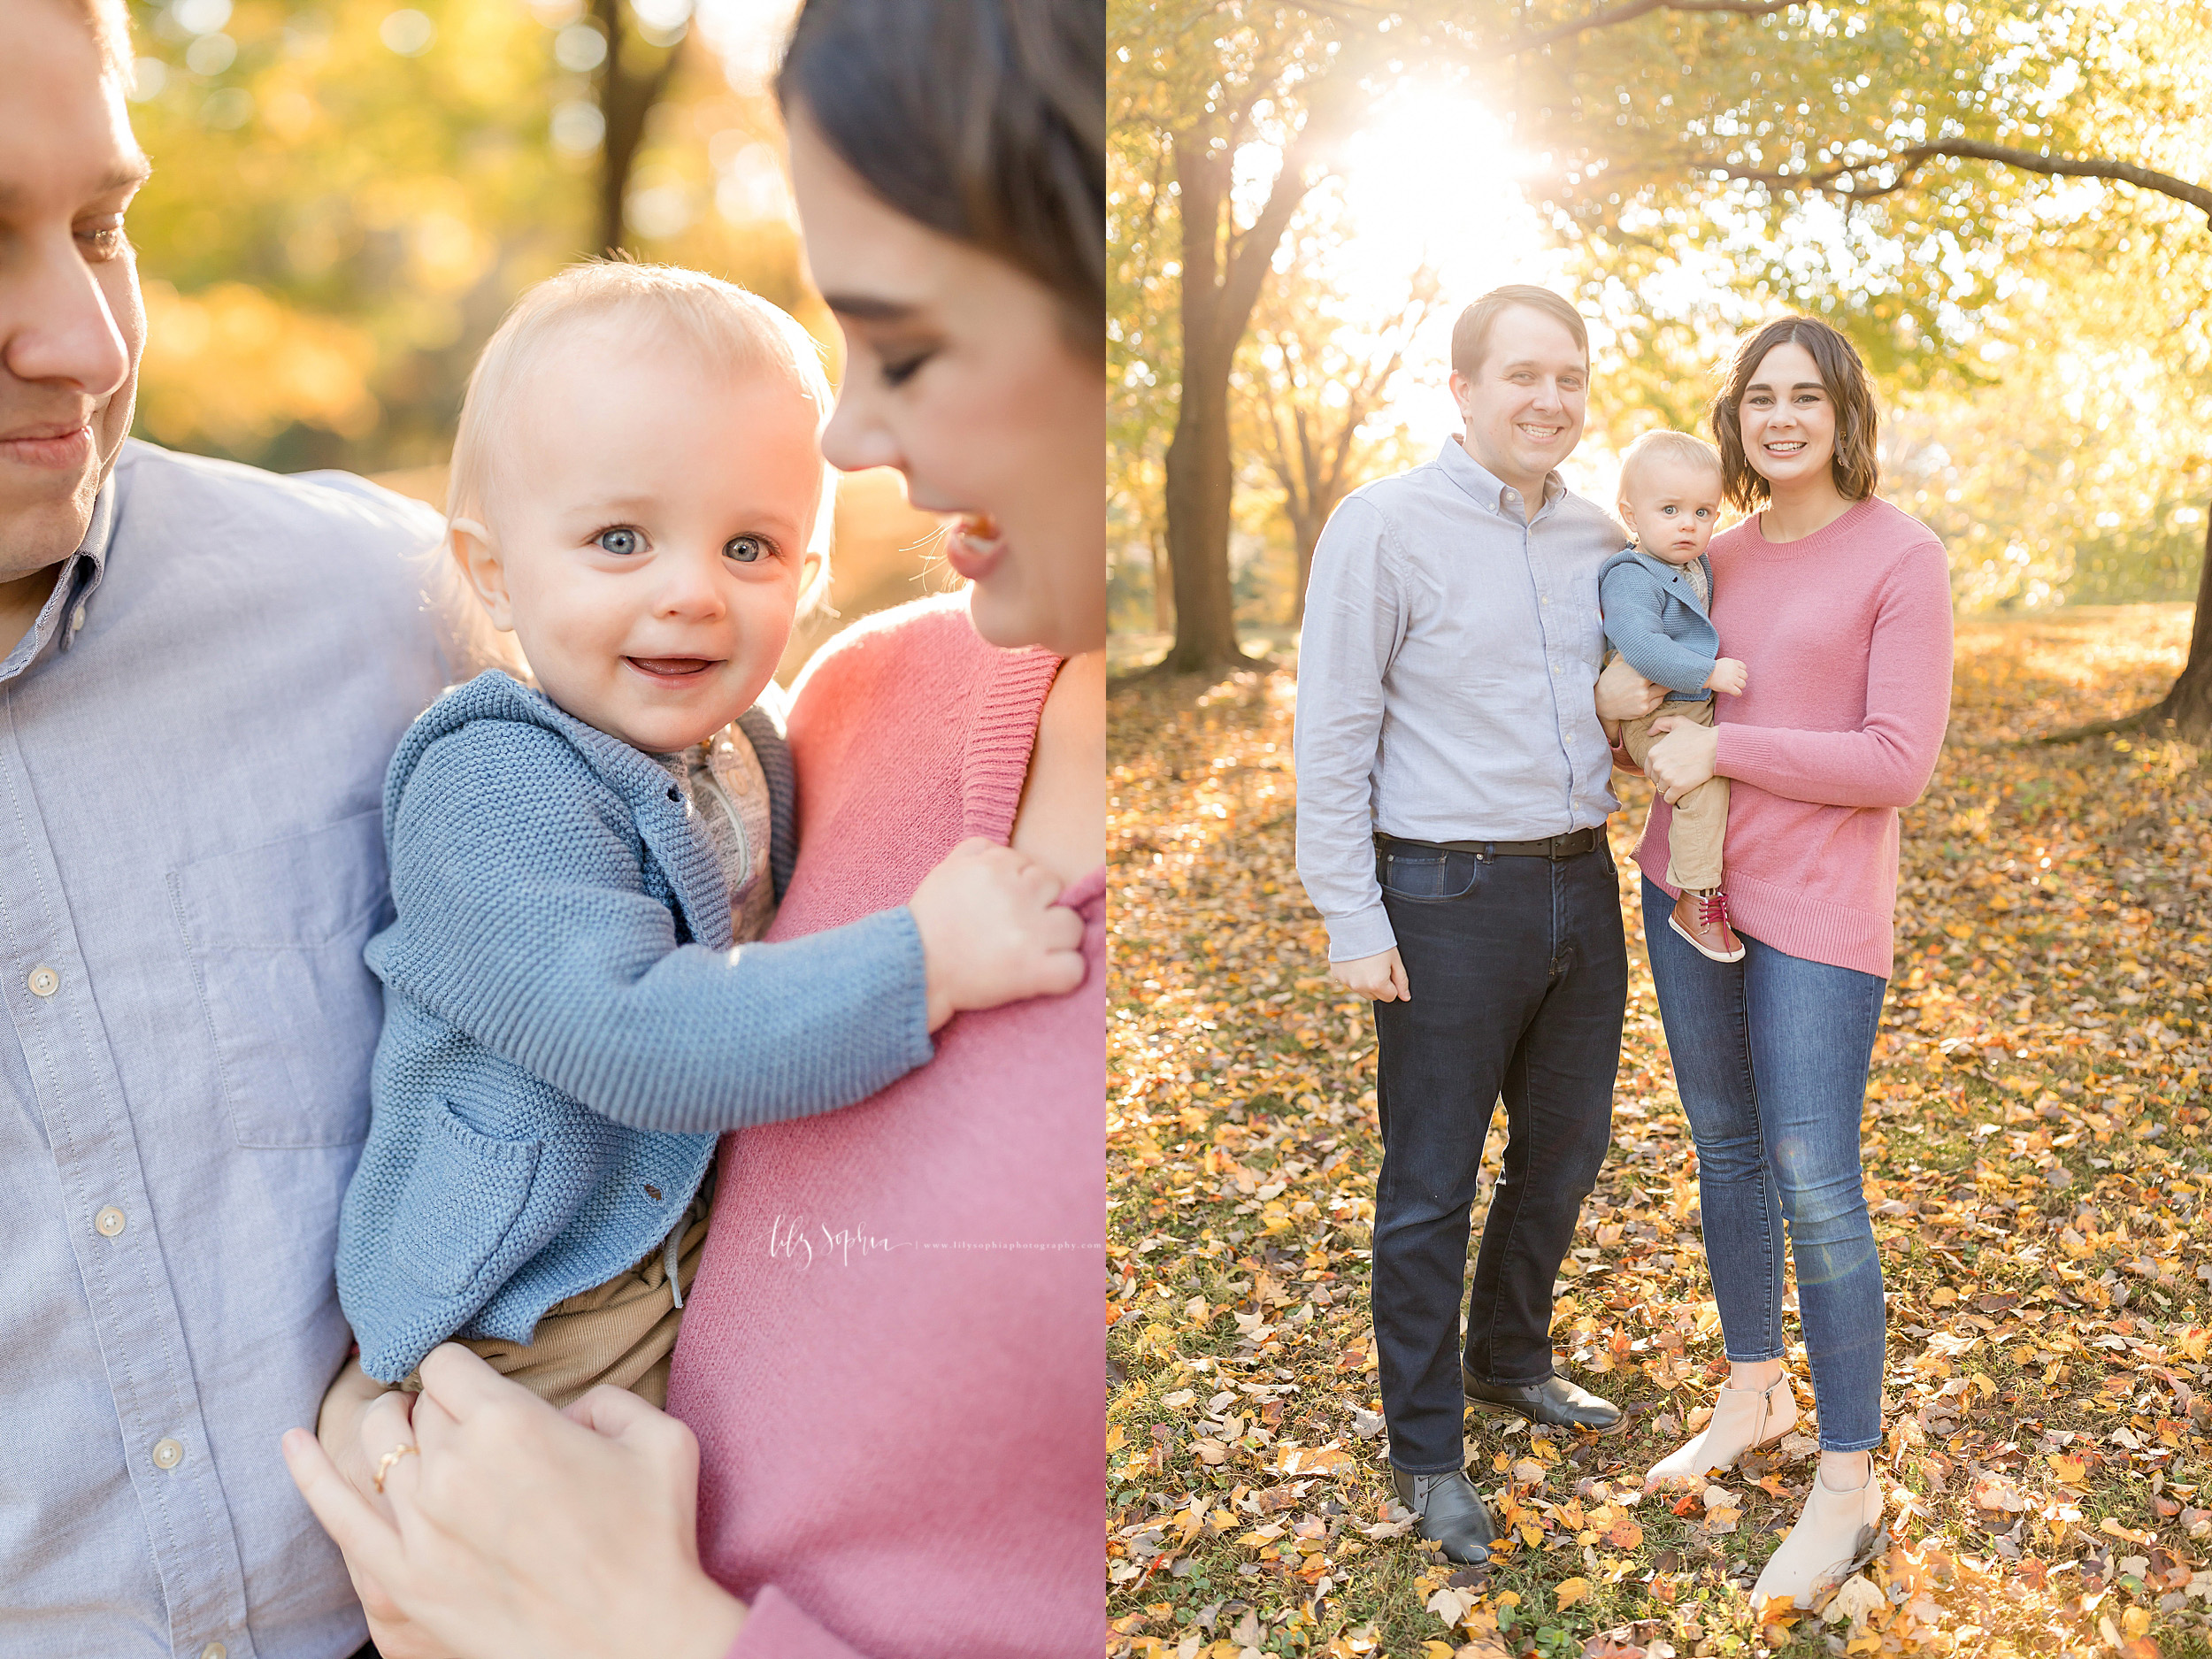 atlanta-brookhaven-decatur-sandy-springs-buckhead-virginia-highlands-west-end-decatur-lily-sophia-photography-ukraine-family-one-year-old-first-birthday-baby-boy-outdoor-fall-cake-smash_1522.jpg